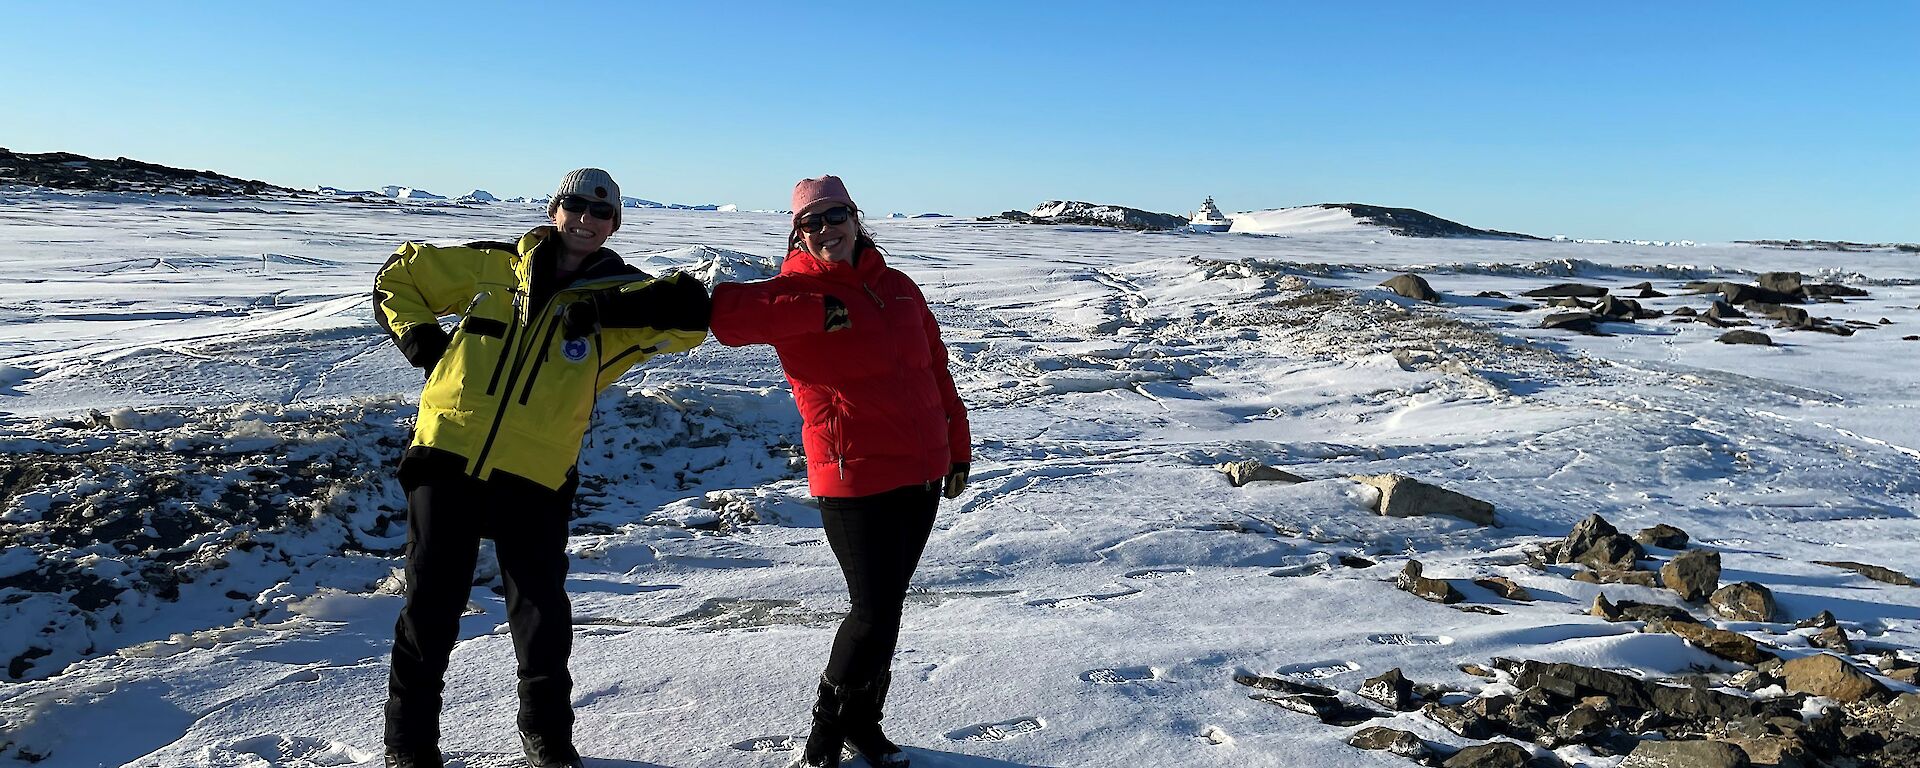 Two smiling women with elbows touching. Sea-ice and icebergs in the background